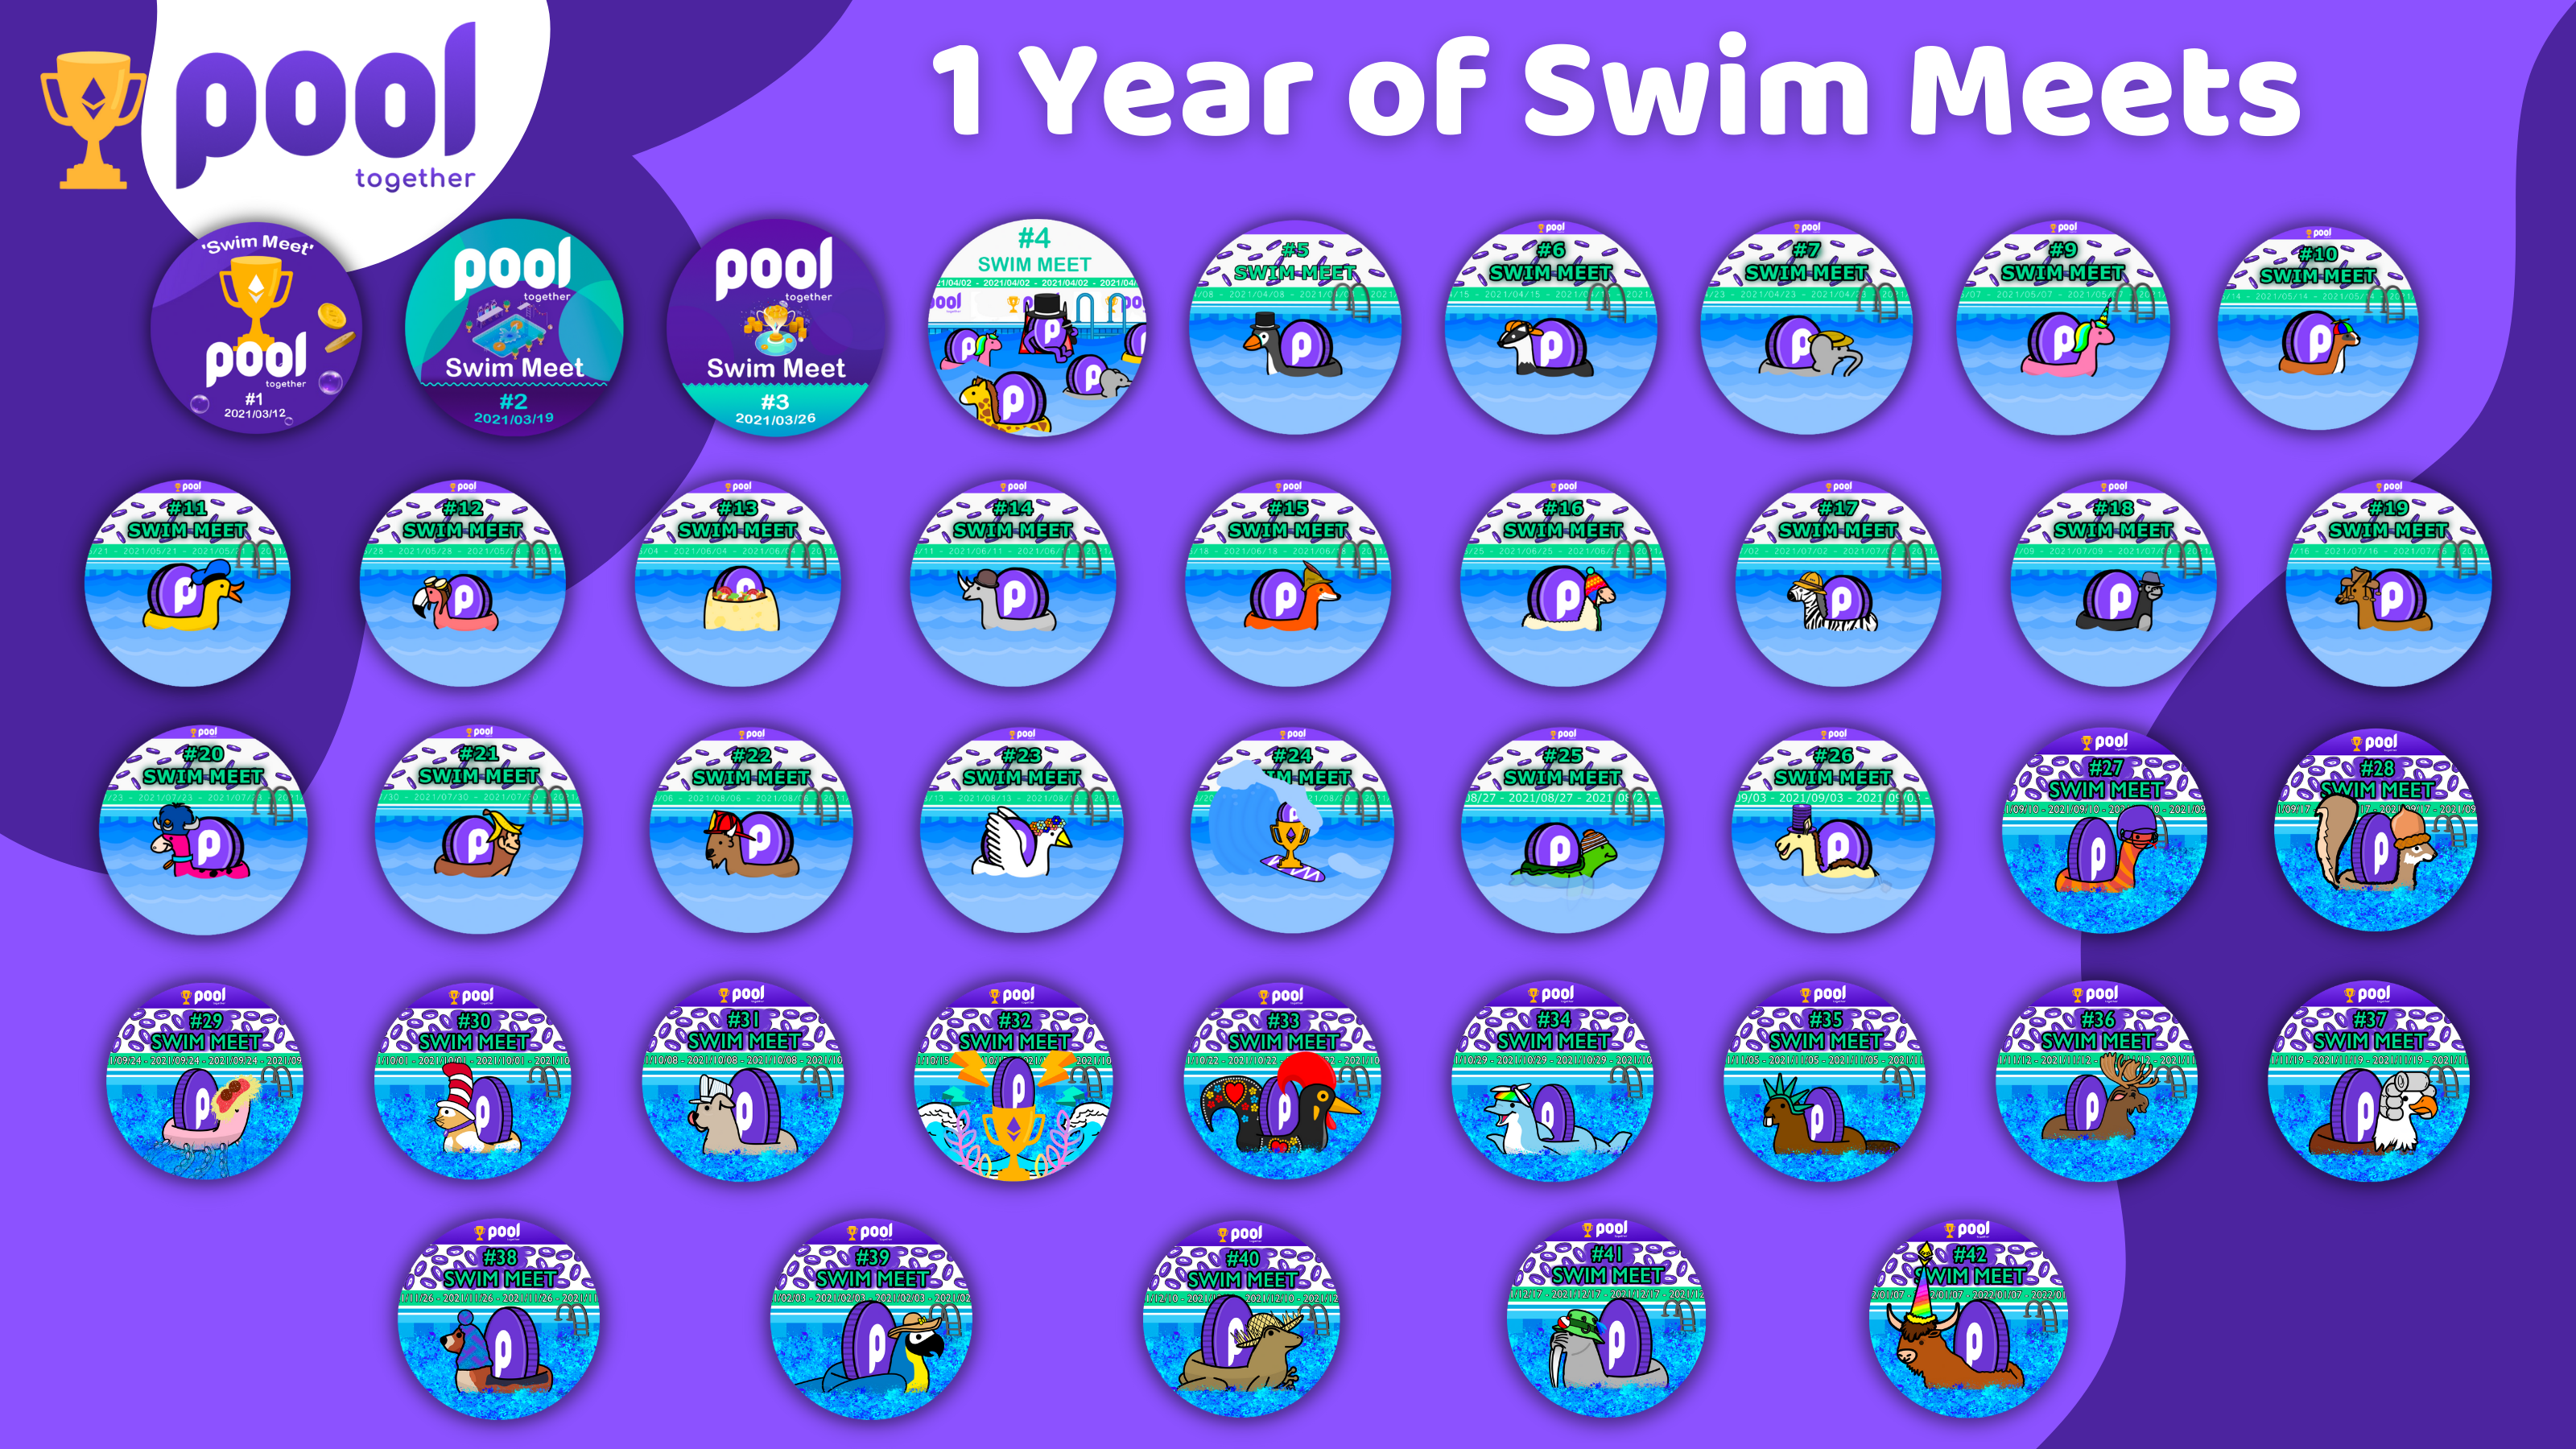 Looking back at the Swim Meet Designs made by Oops